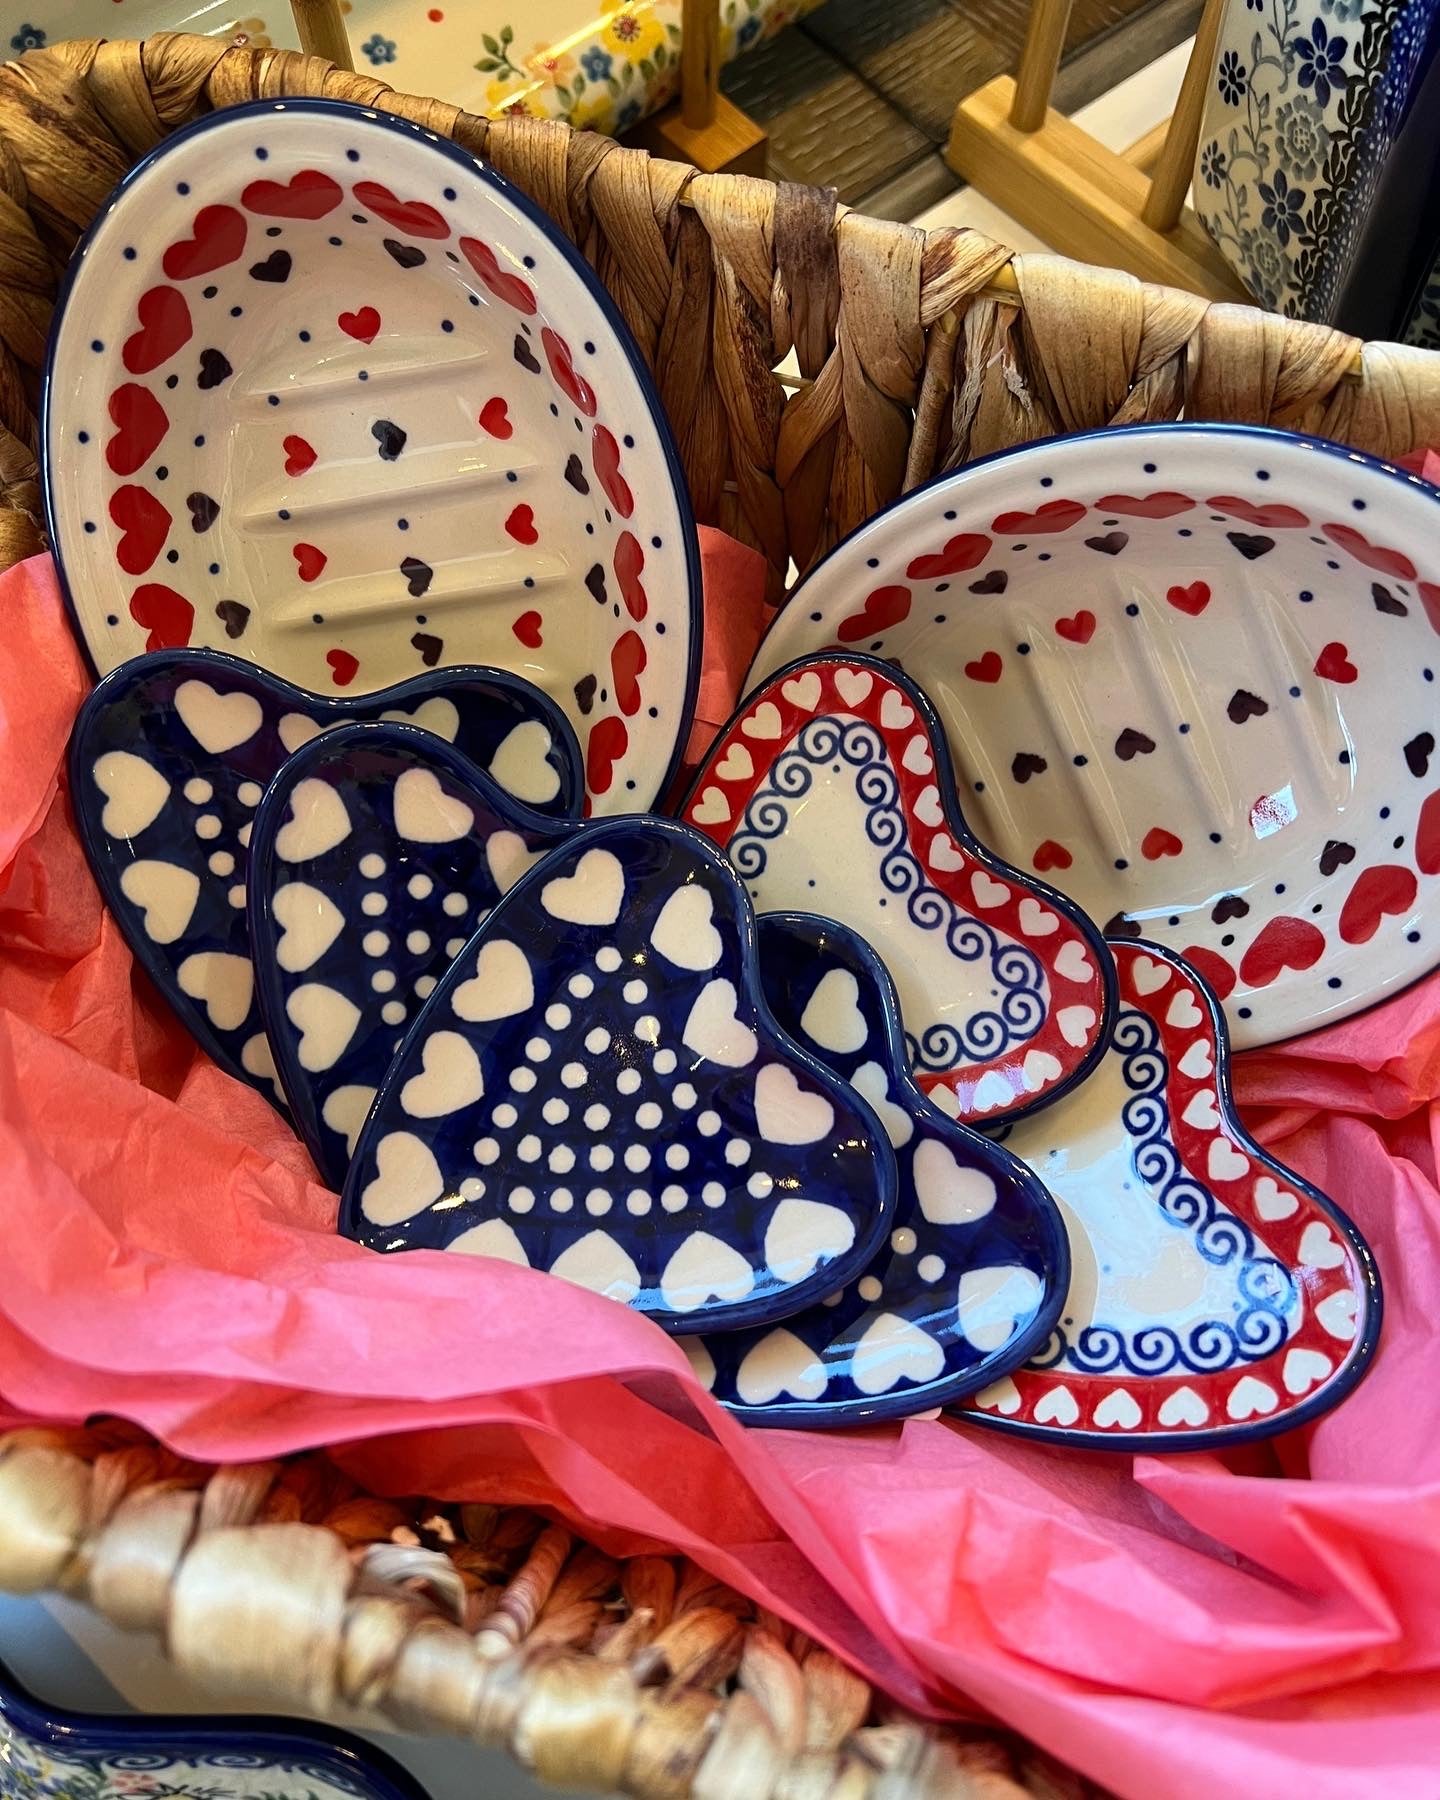 Polish Pottery for Valentine's Day